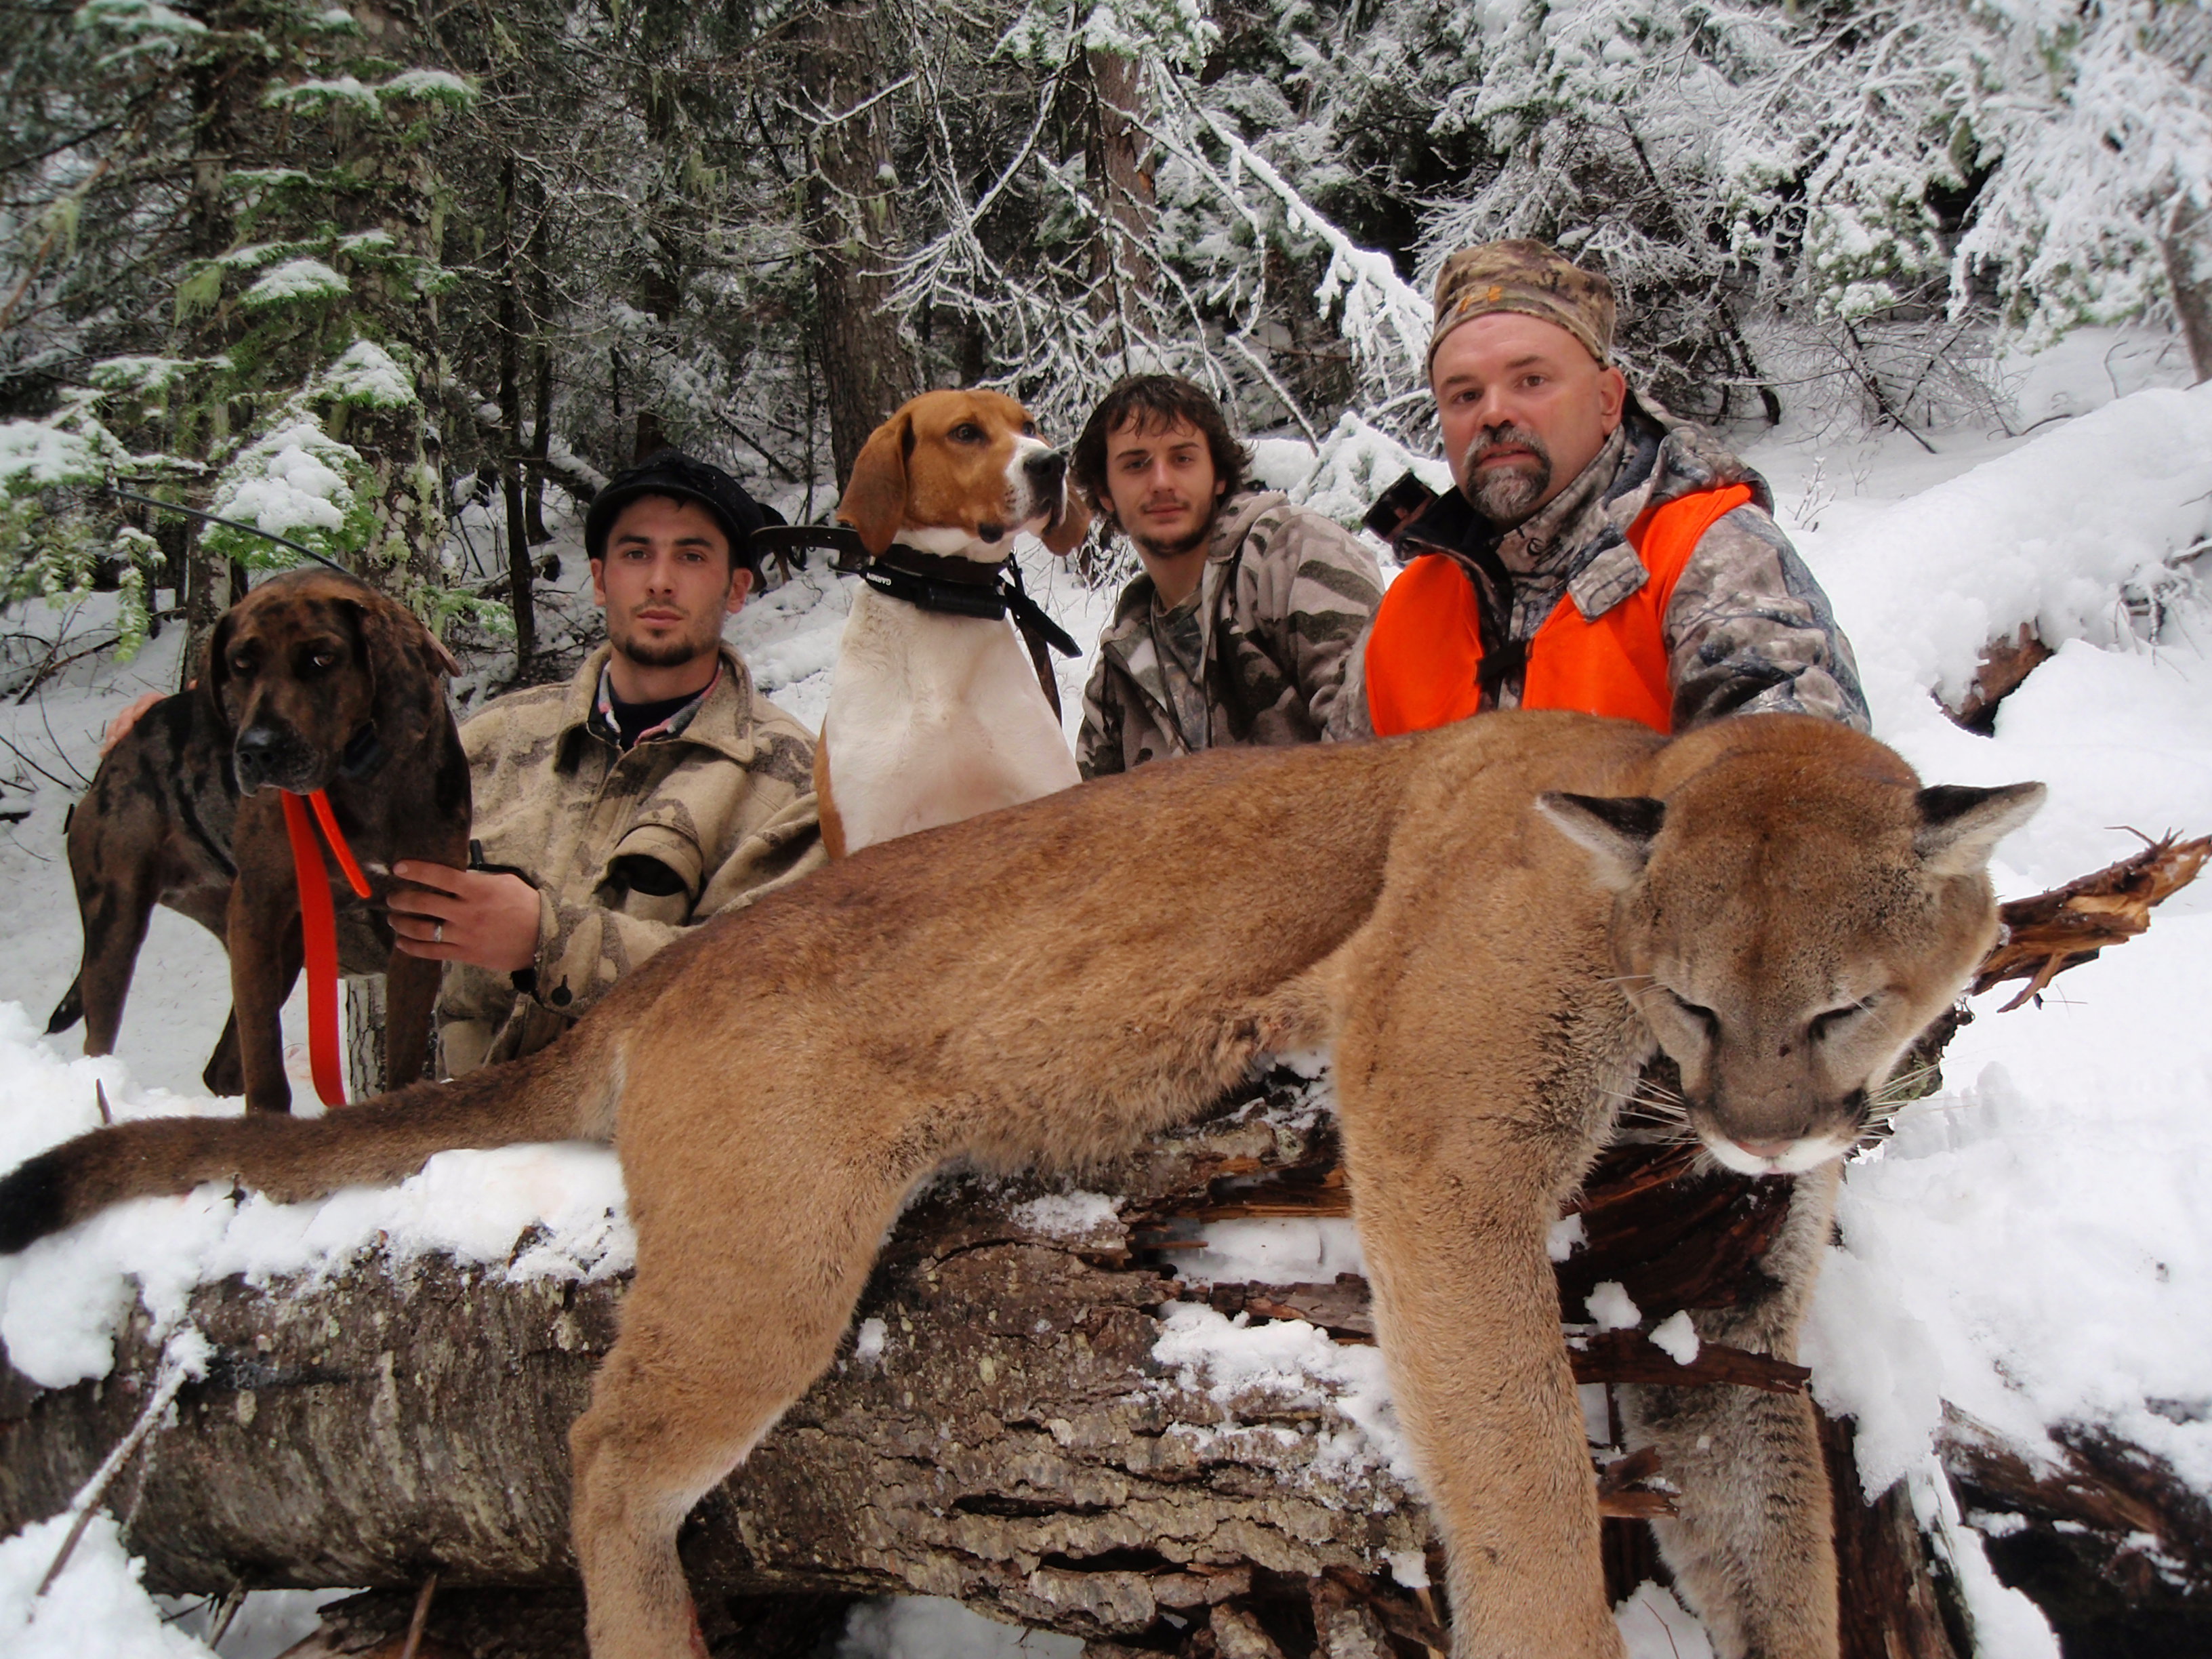 Montana guided cougar hunts